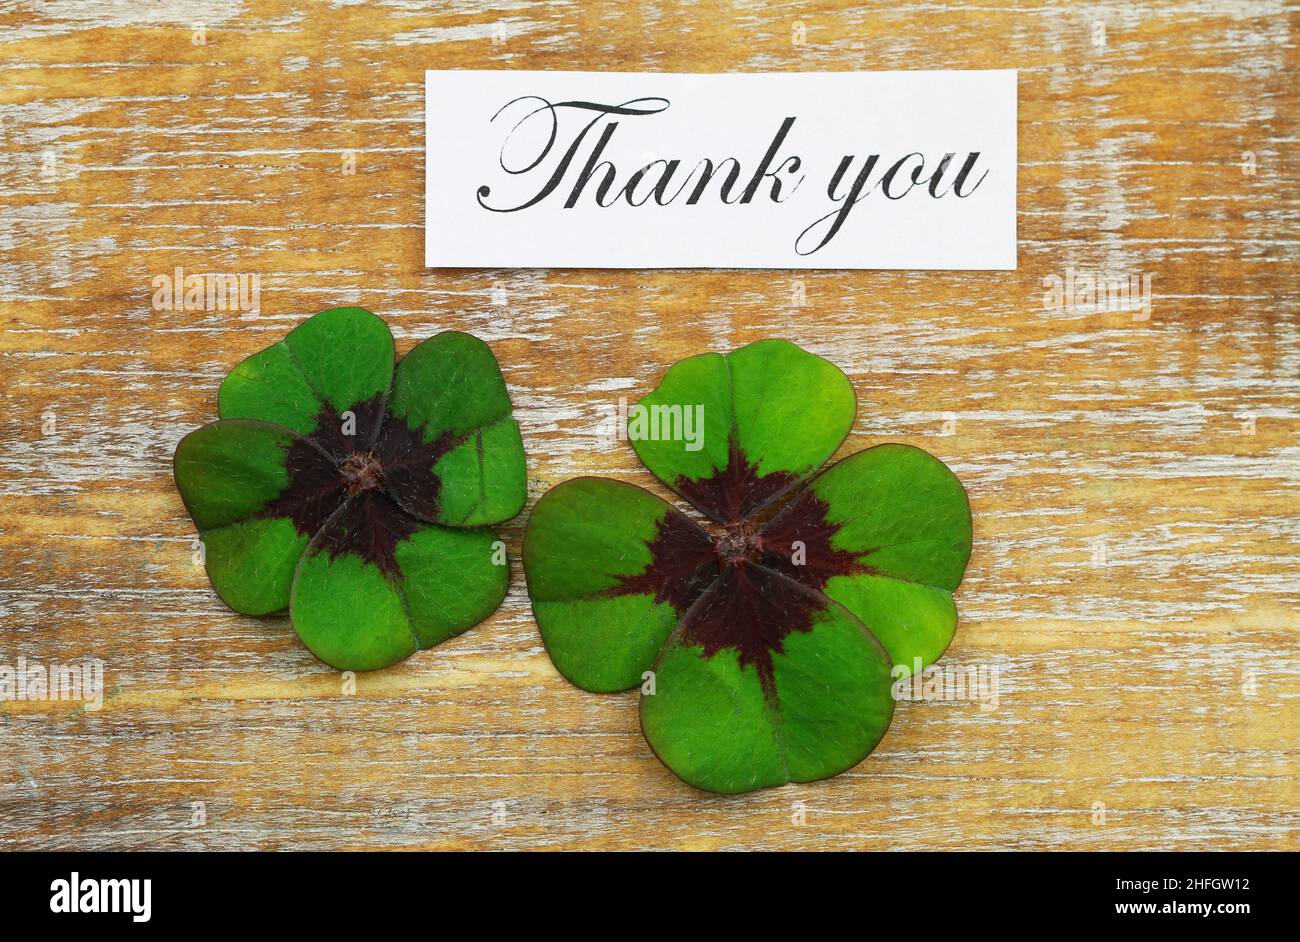 Thank you card with two shamrocks on wooden surface Stock Photo